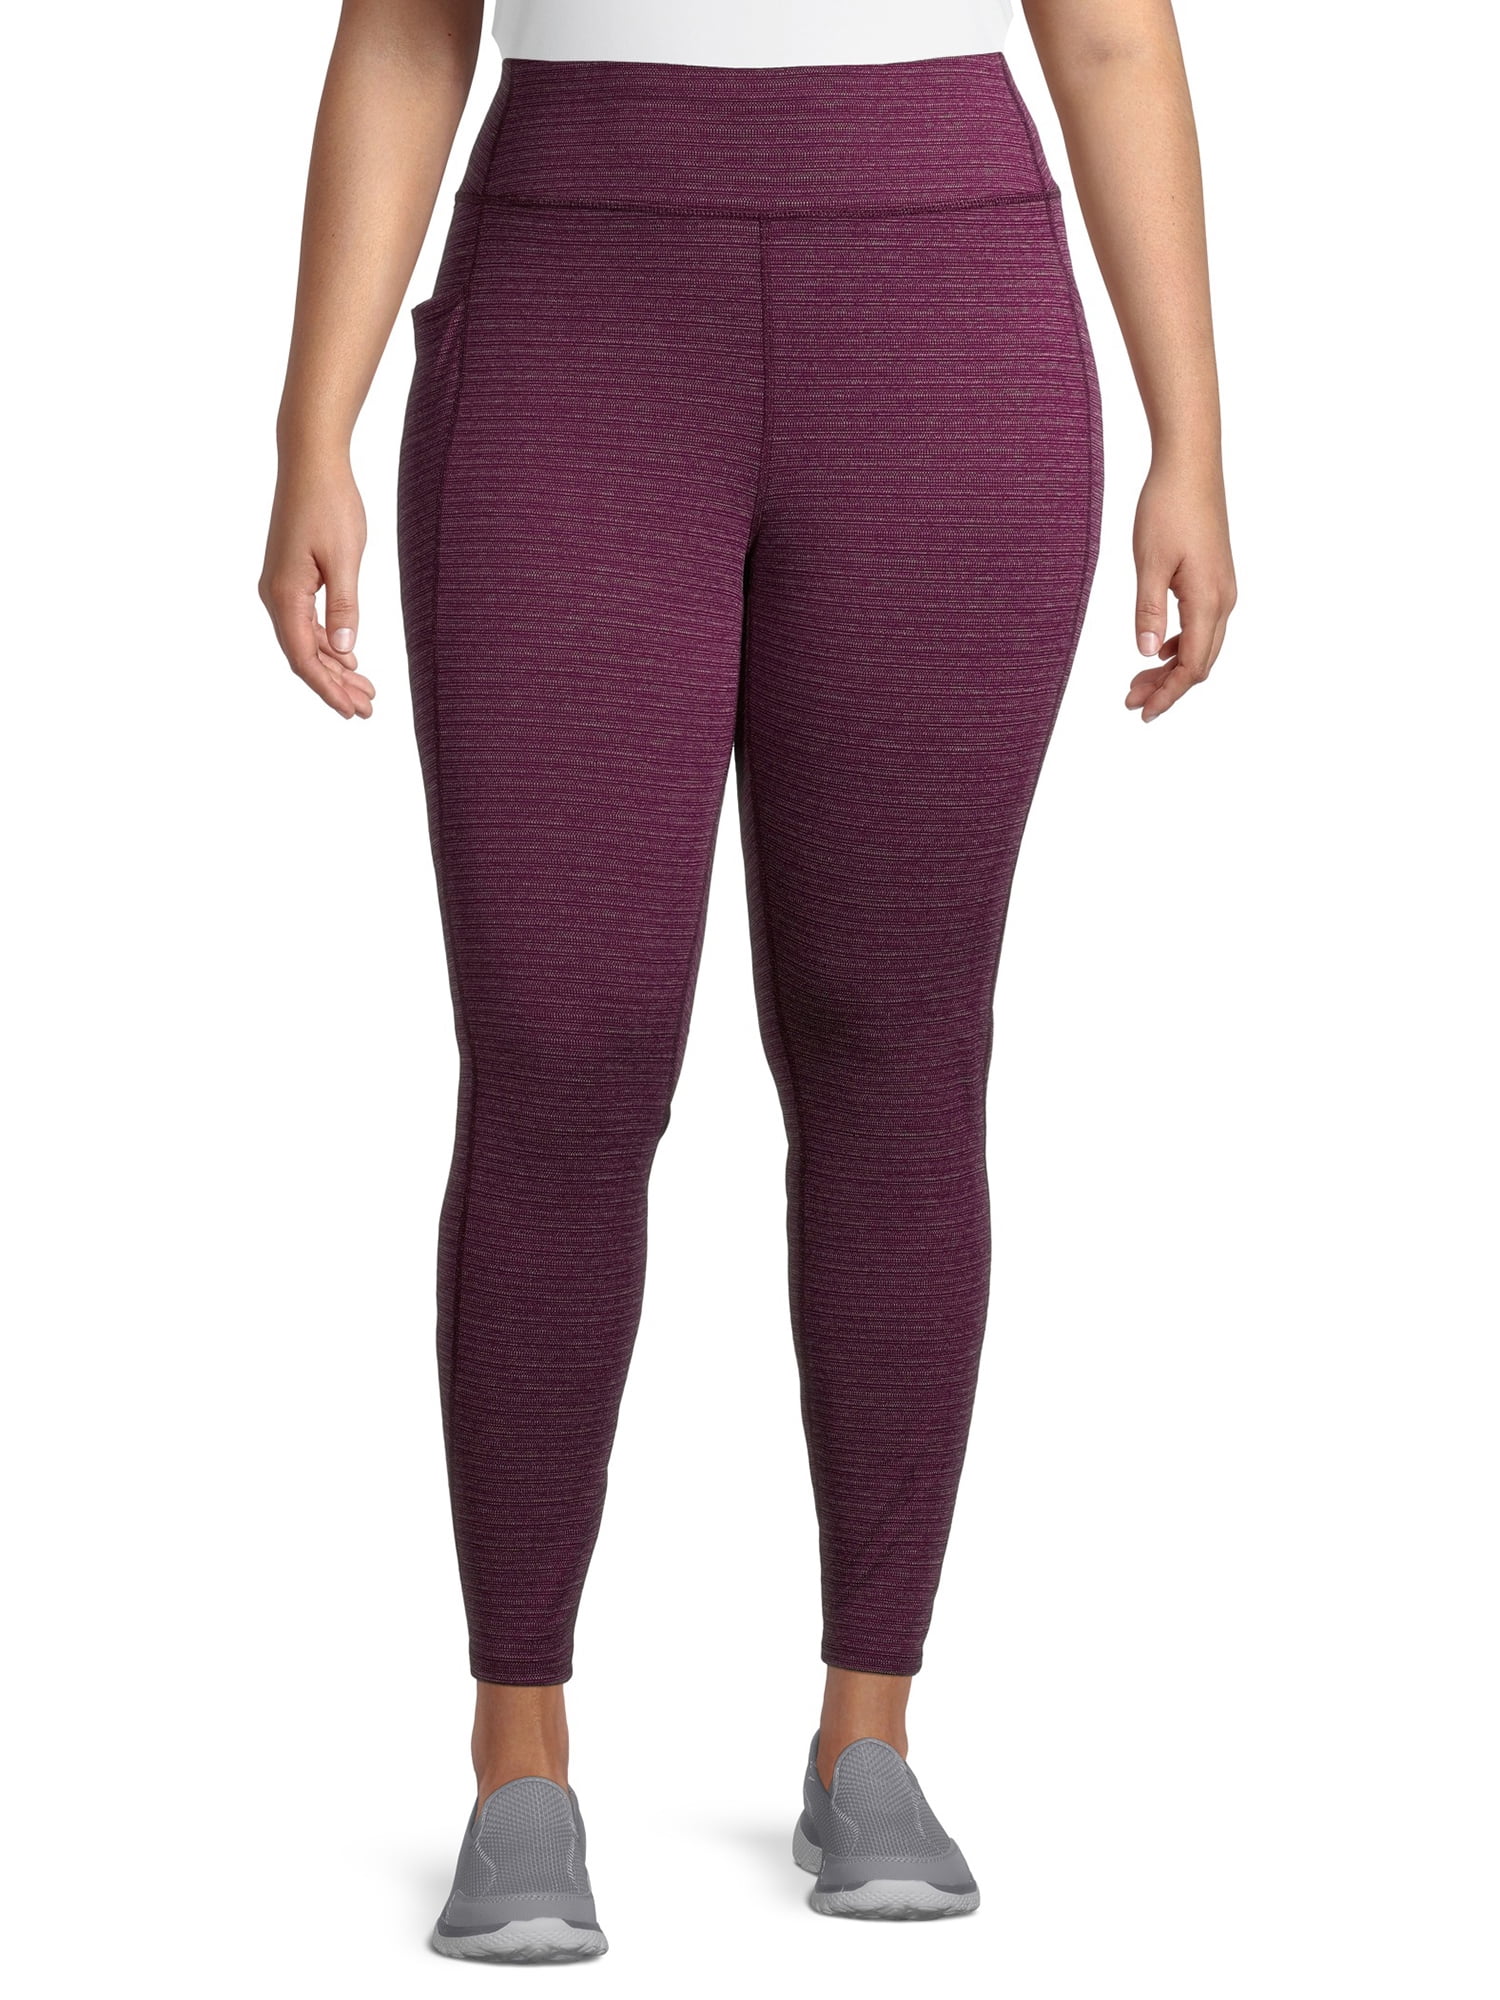 Do Athleta Leggings Stretch Outside  International Society of Precision  Agriculture